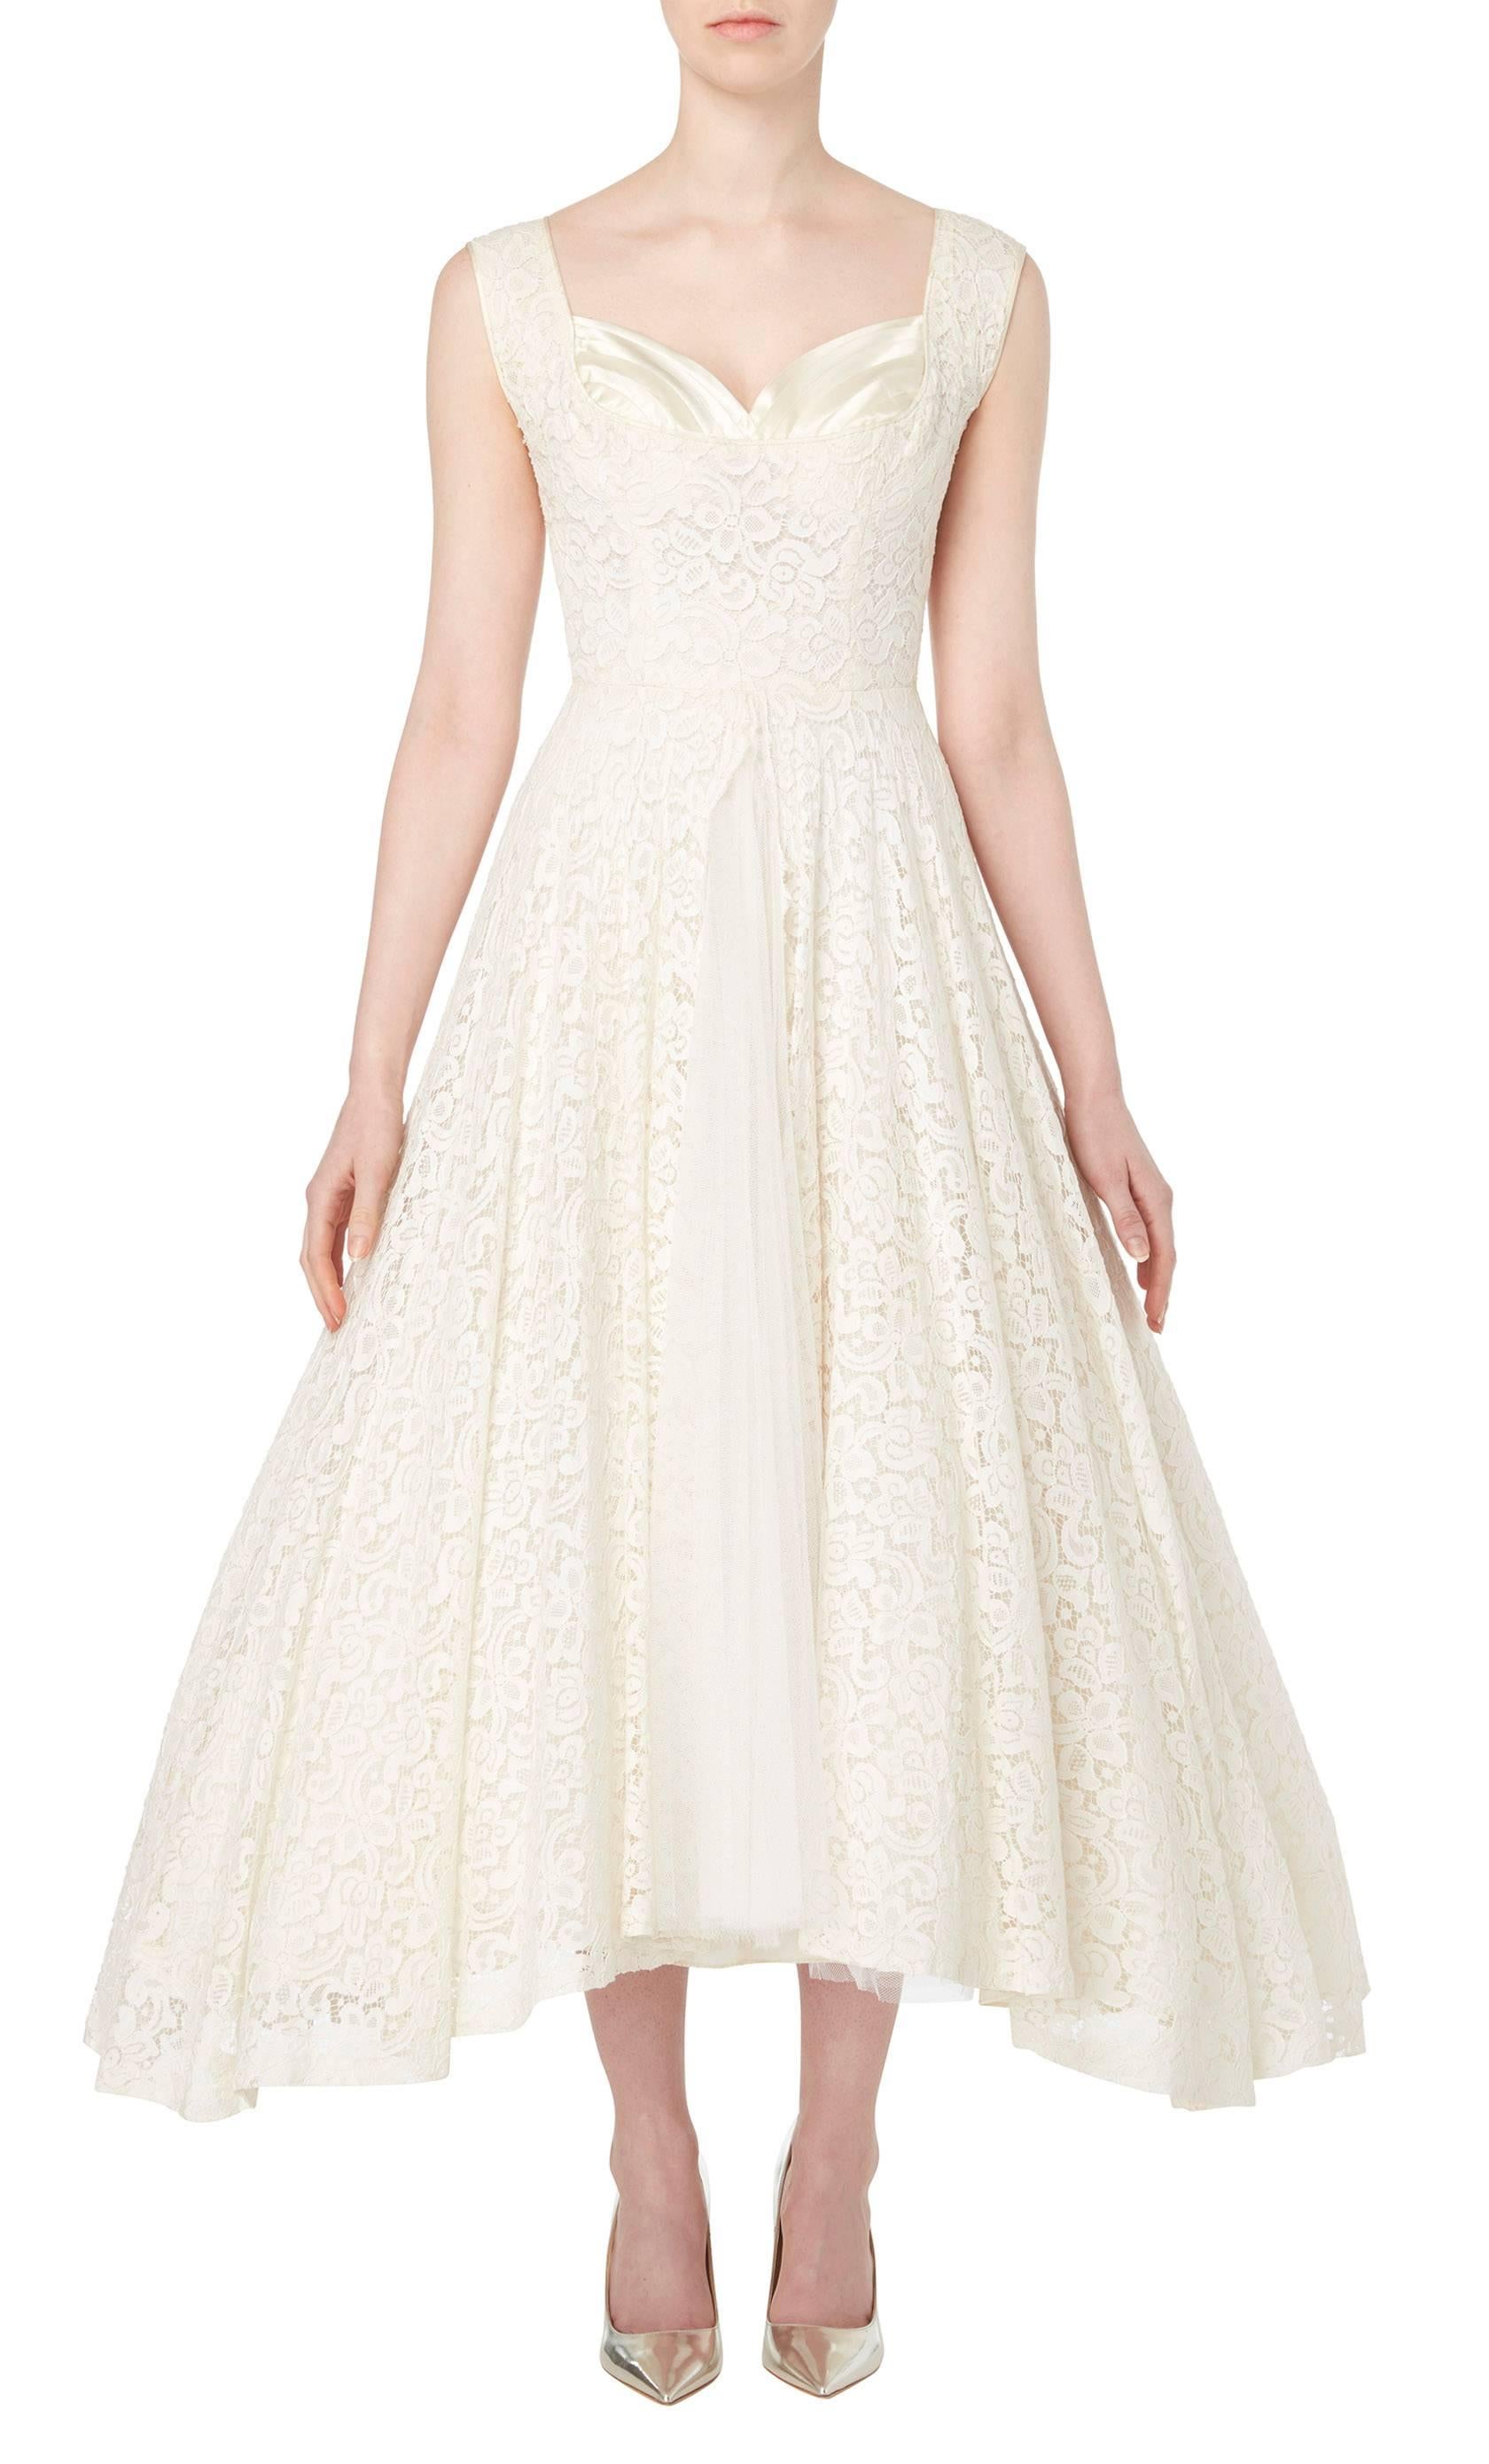 A stunning option for a wedding or summer party, this Jean Patou haute couture dress is the epitome of chic! Constructed in ivory lace, the dress features a sweetheart neckline with a pleated satin bust. The lace of the skirt is split up the front